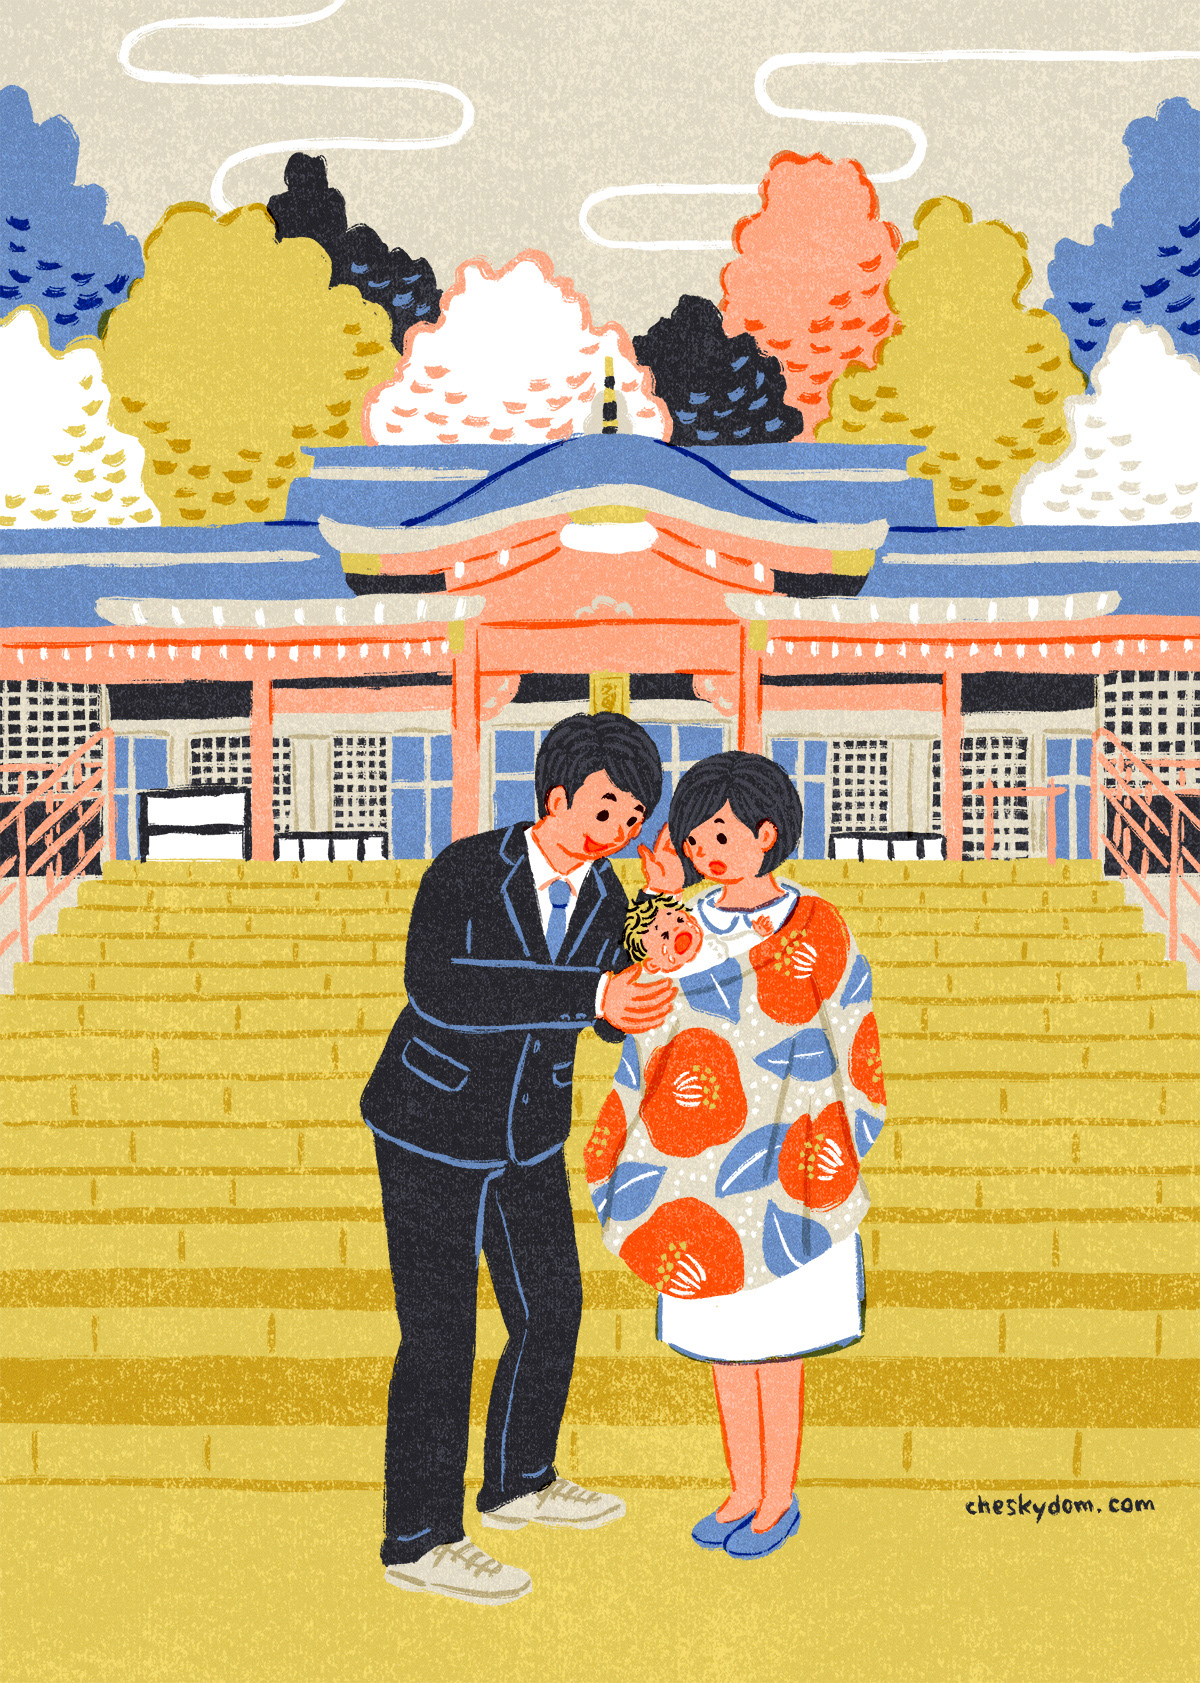 The illustration of a family with a baby at a shrine.